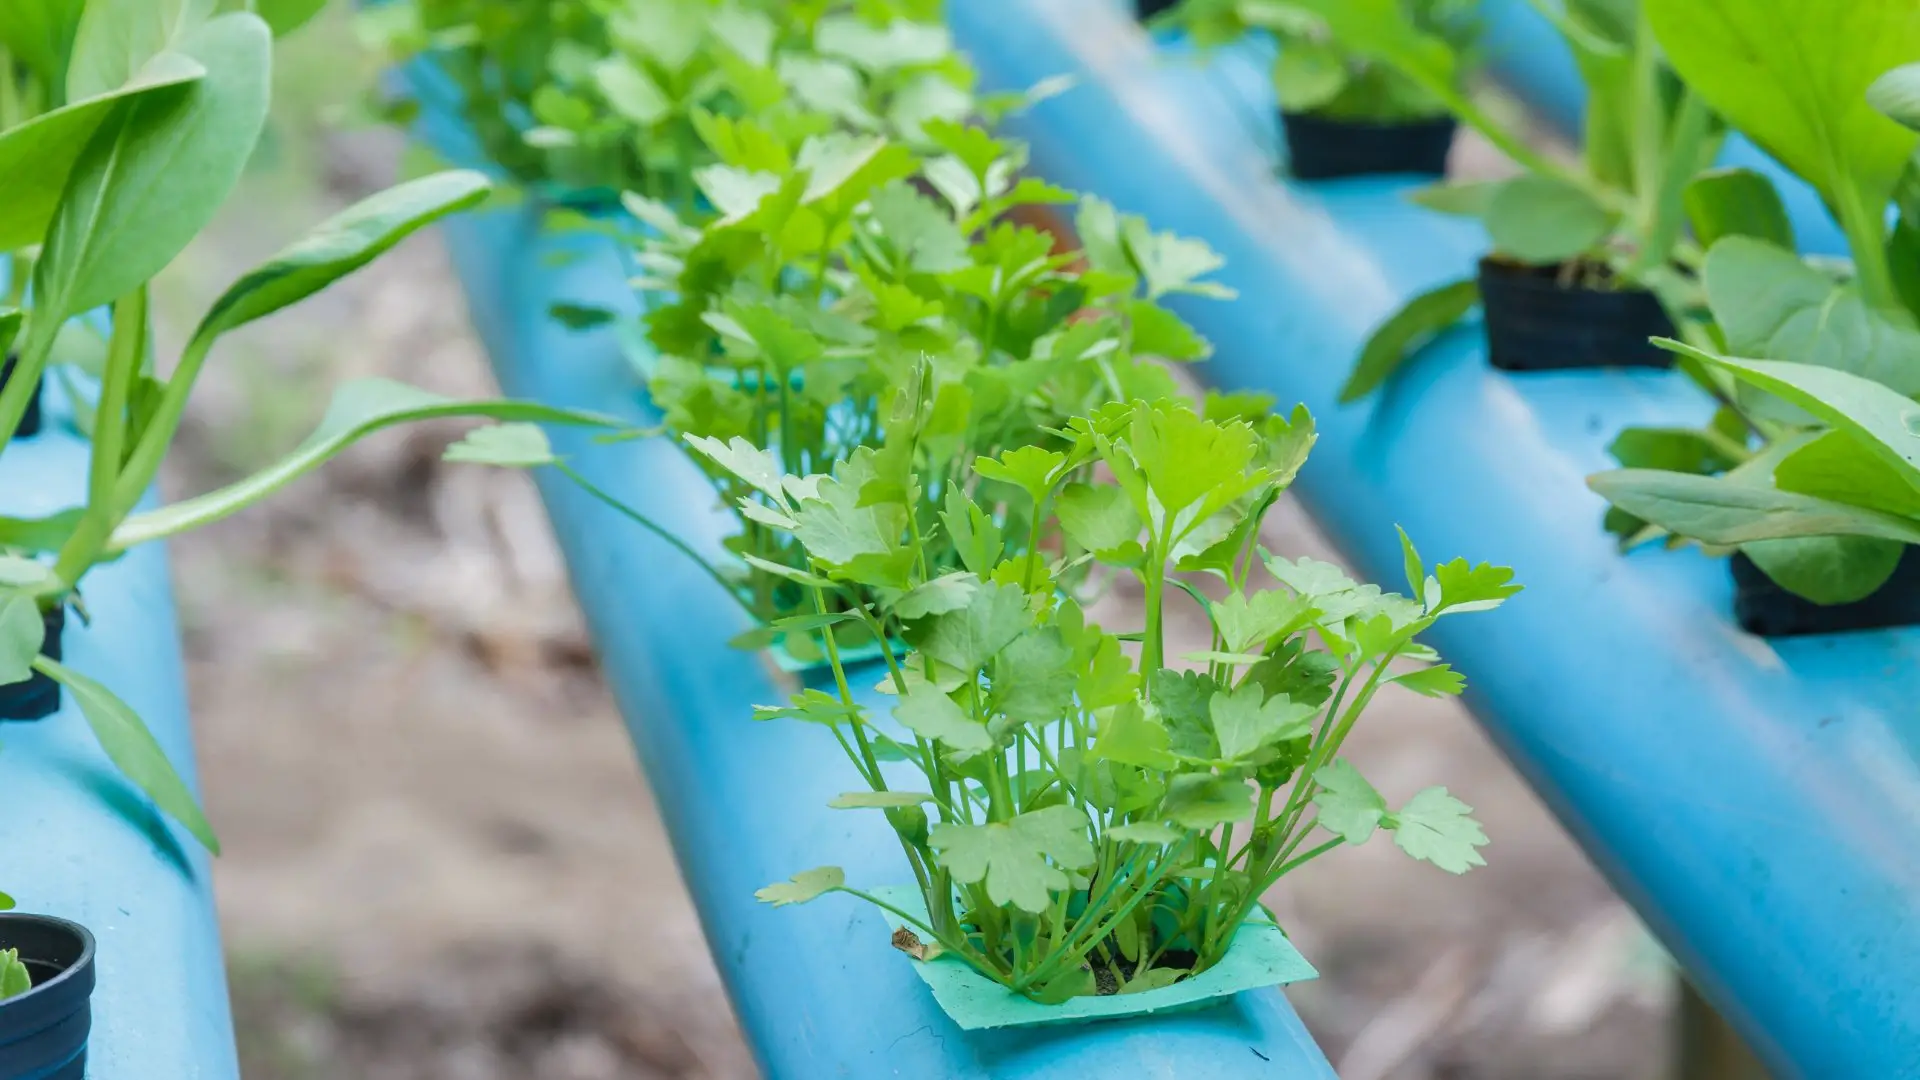 % In this article, you will learn about the essential elements that must be monitored and managed when it comes to water quality in hydroponic systems.